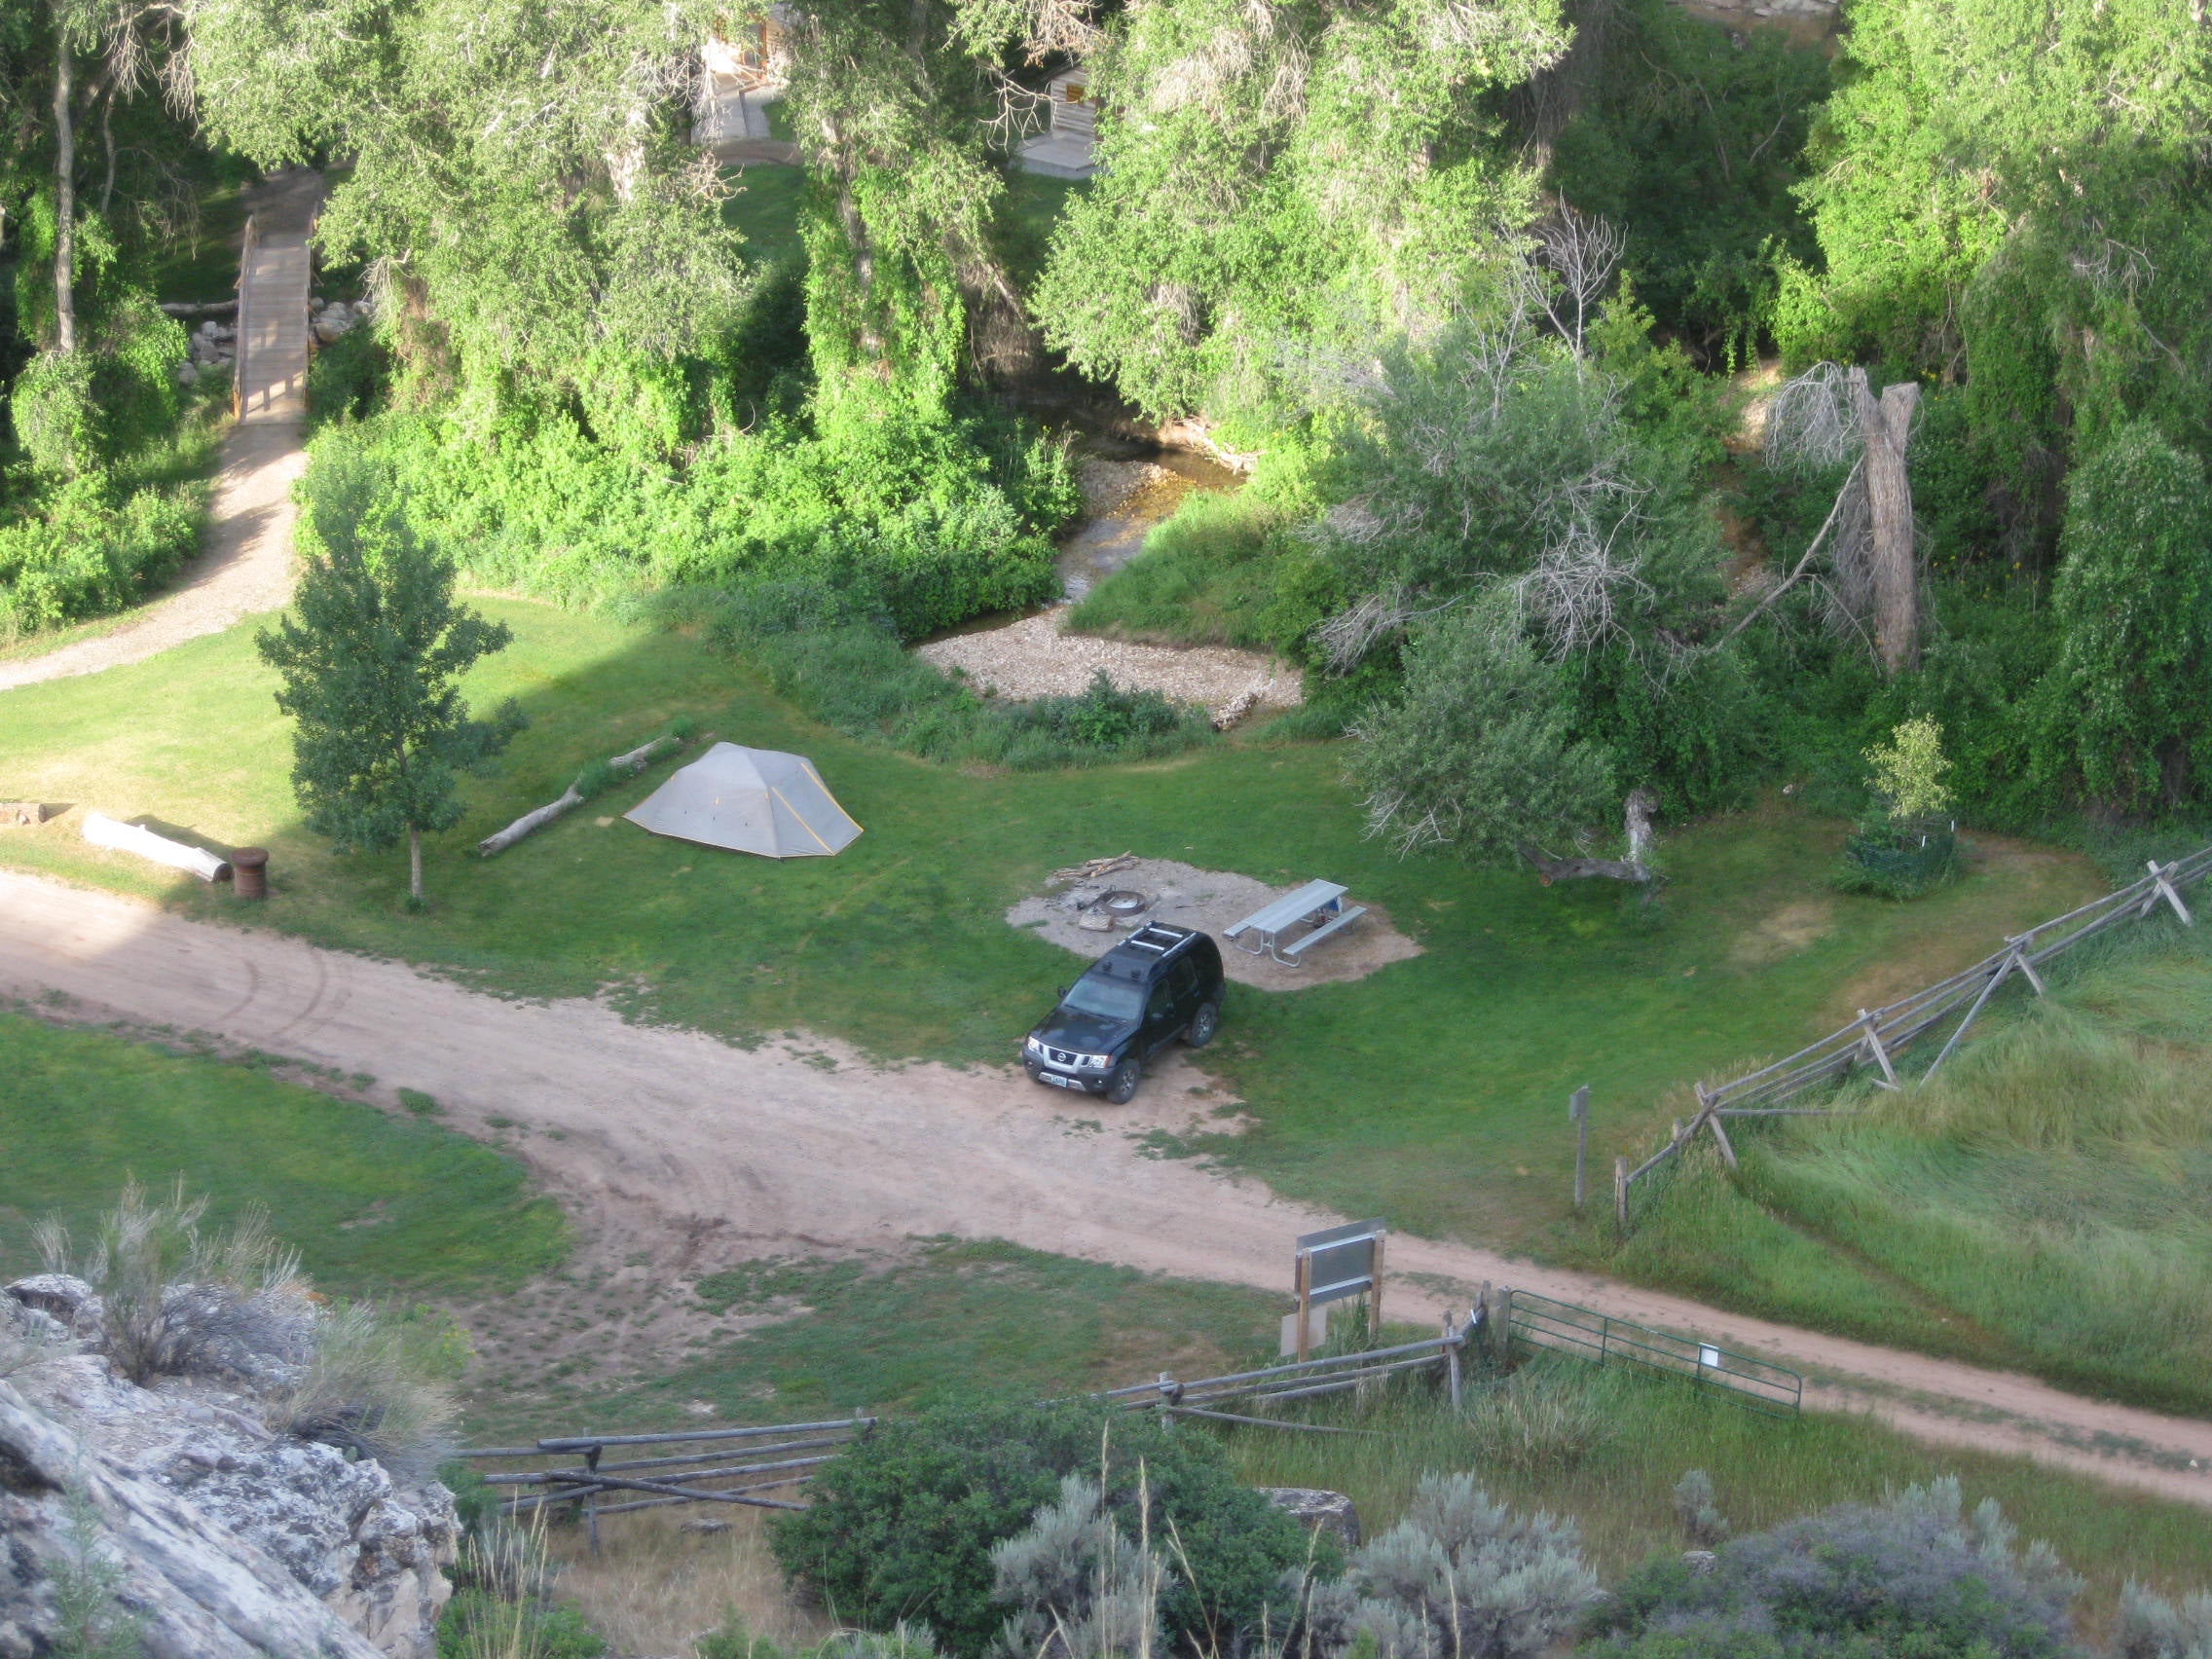 Eagle eye view of northern-most campsite in park taken July 2014. Road going to the right is where you can gather firewood.